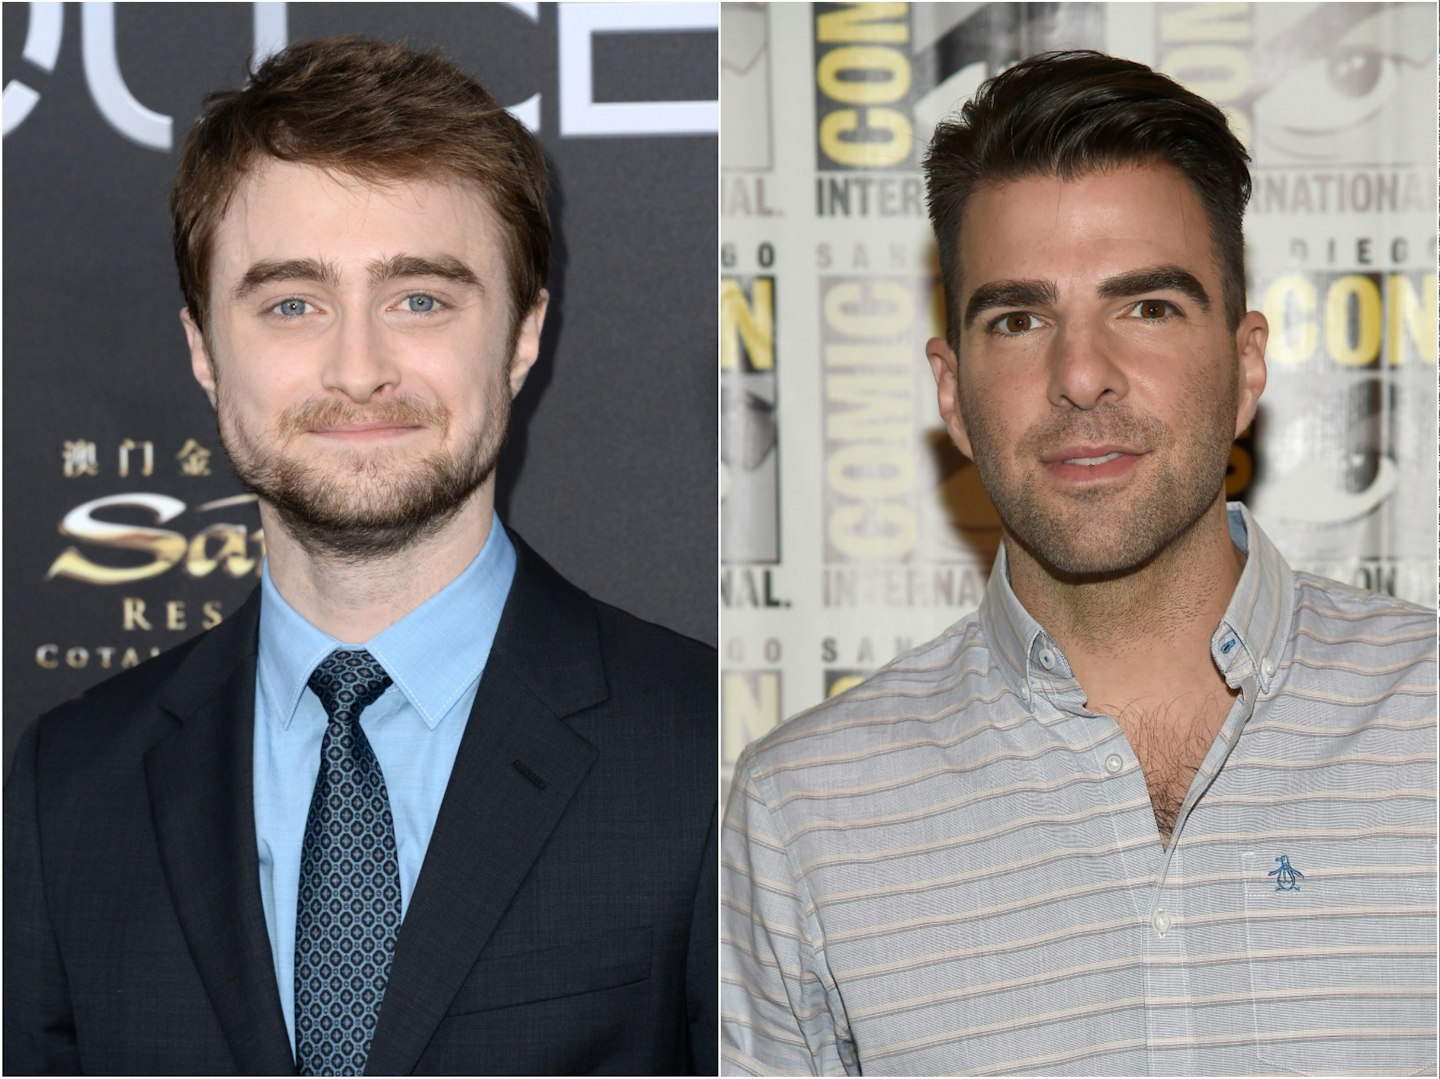 Daniel Radcliffe and Zachary Quinto